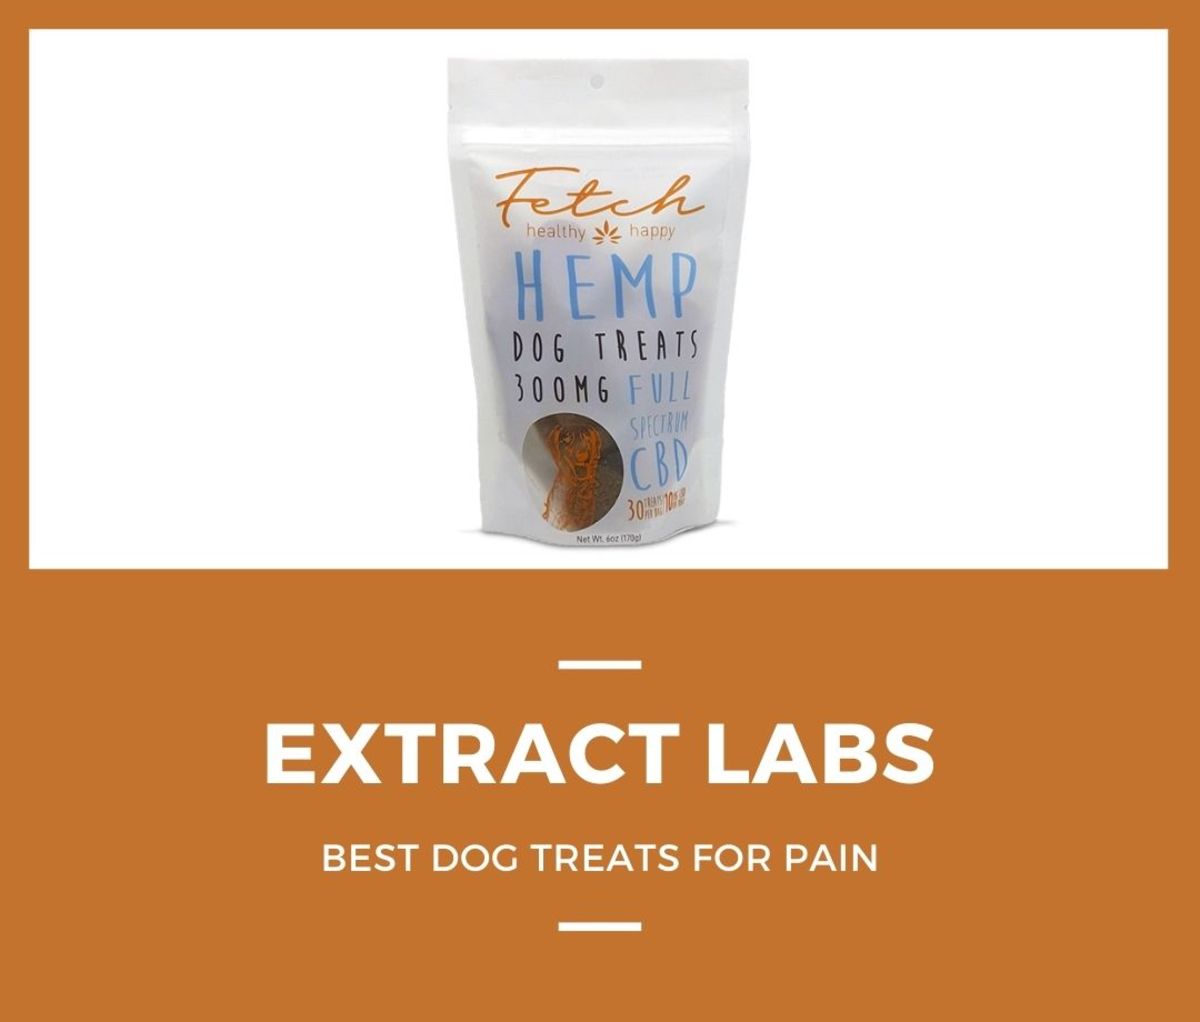 9. Extract Labs